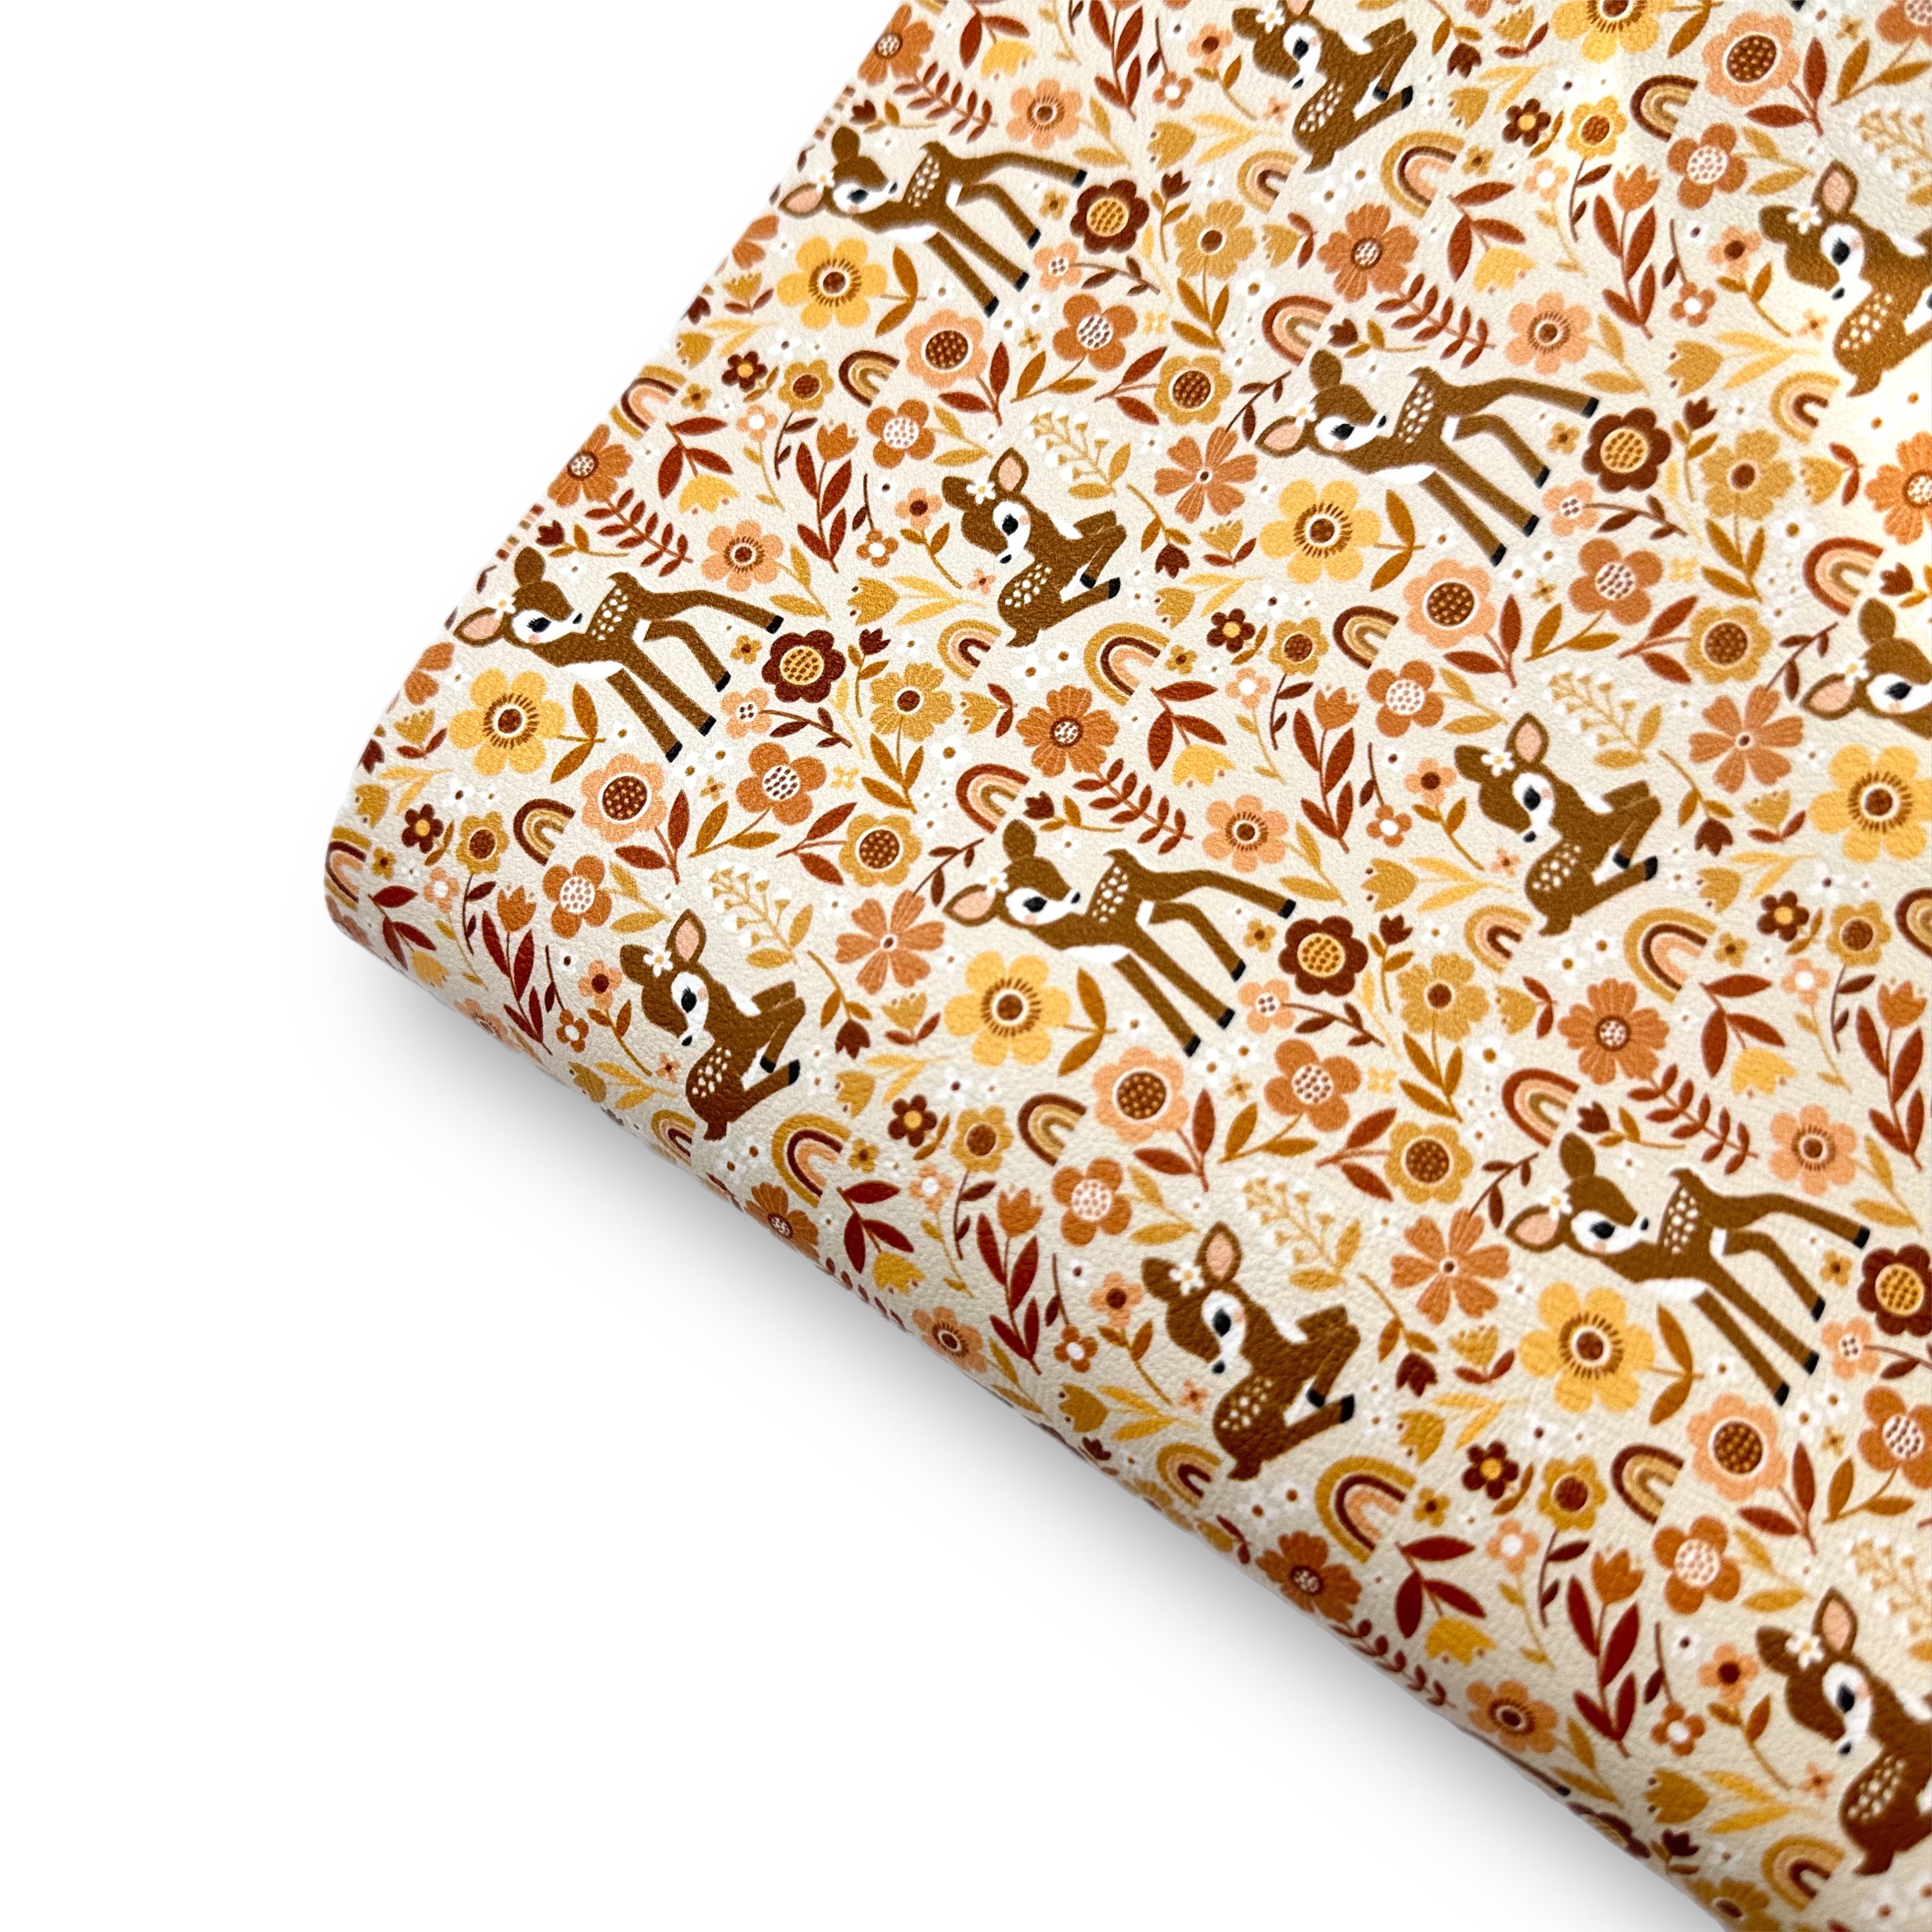 Autumn Baby Deer Floral Premium Faux Leather Fabric Sheets